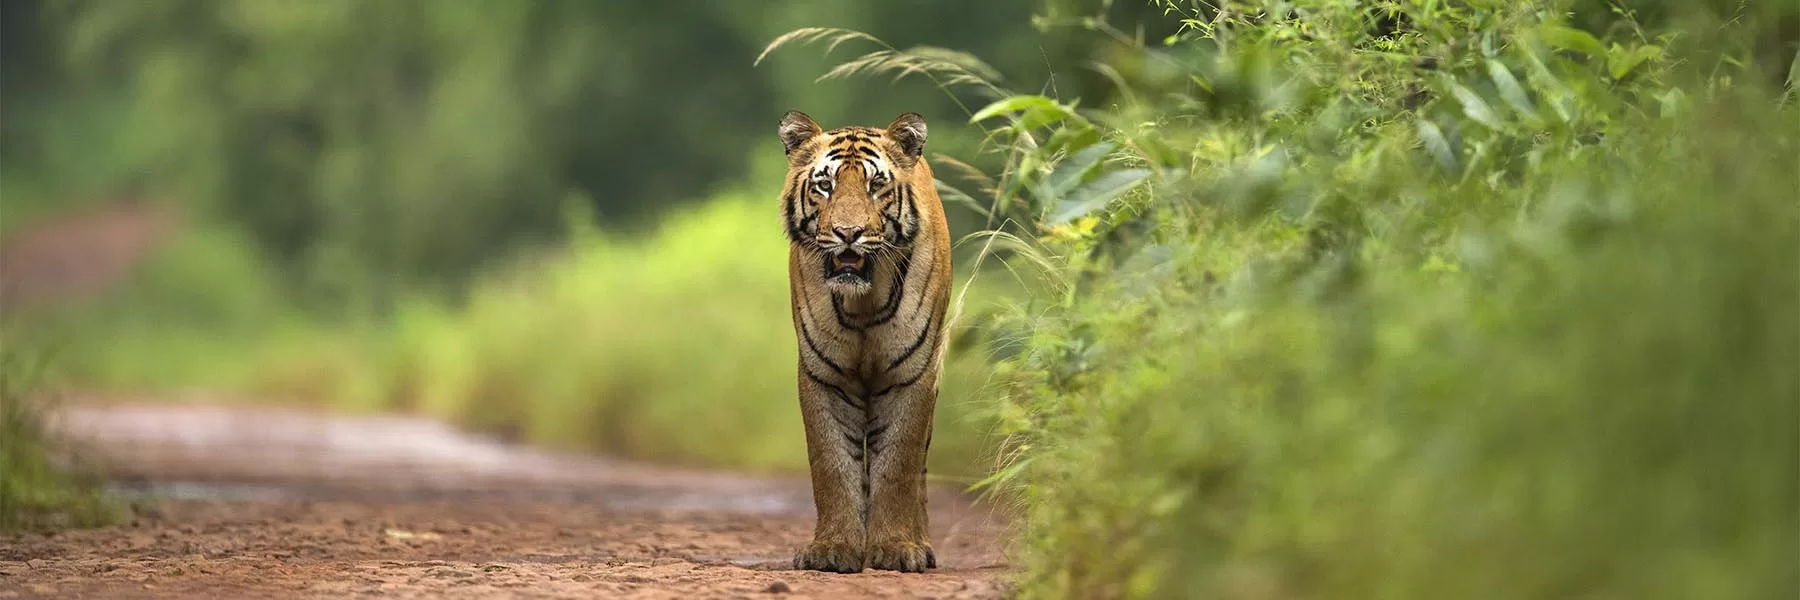 Ten lesser known tiger parks of India